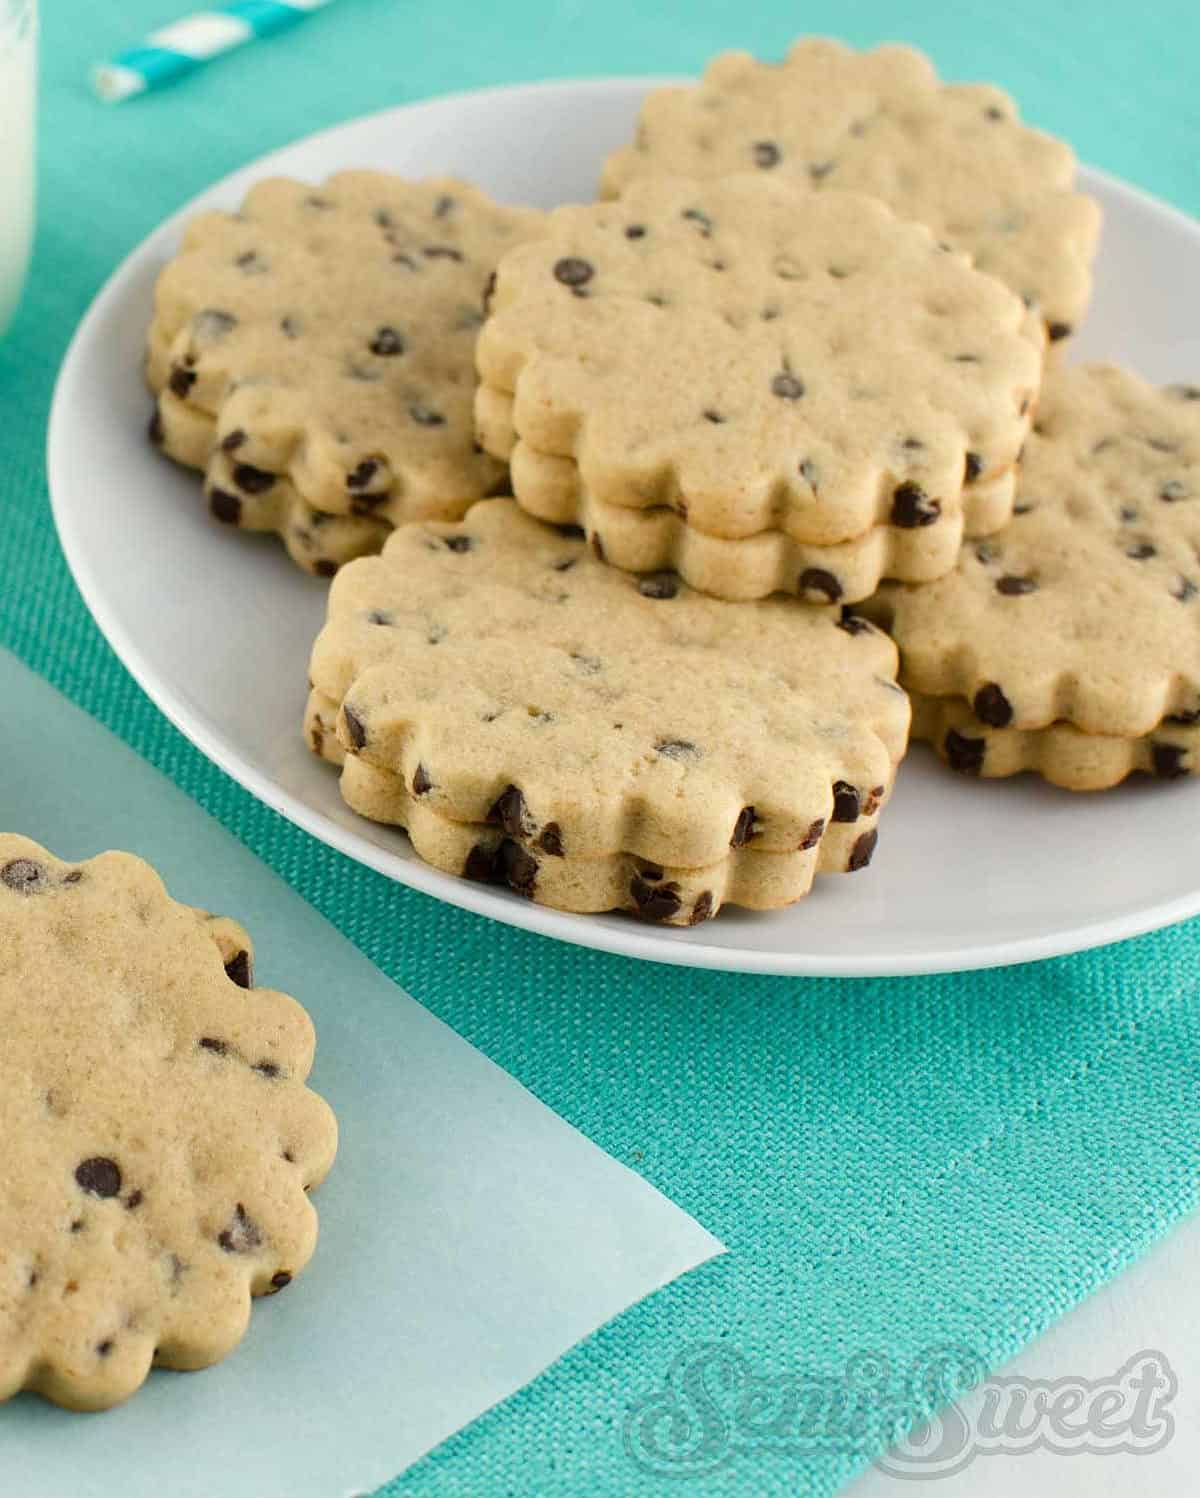  These cookies are the perfect treat for a holiday gathering or just a family snack.